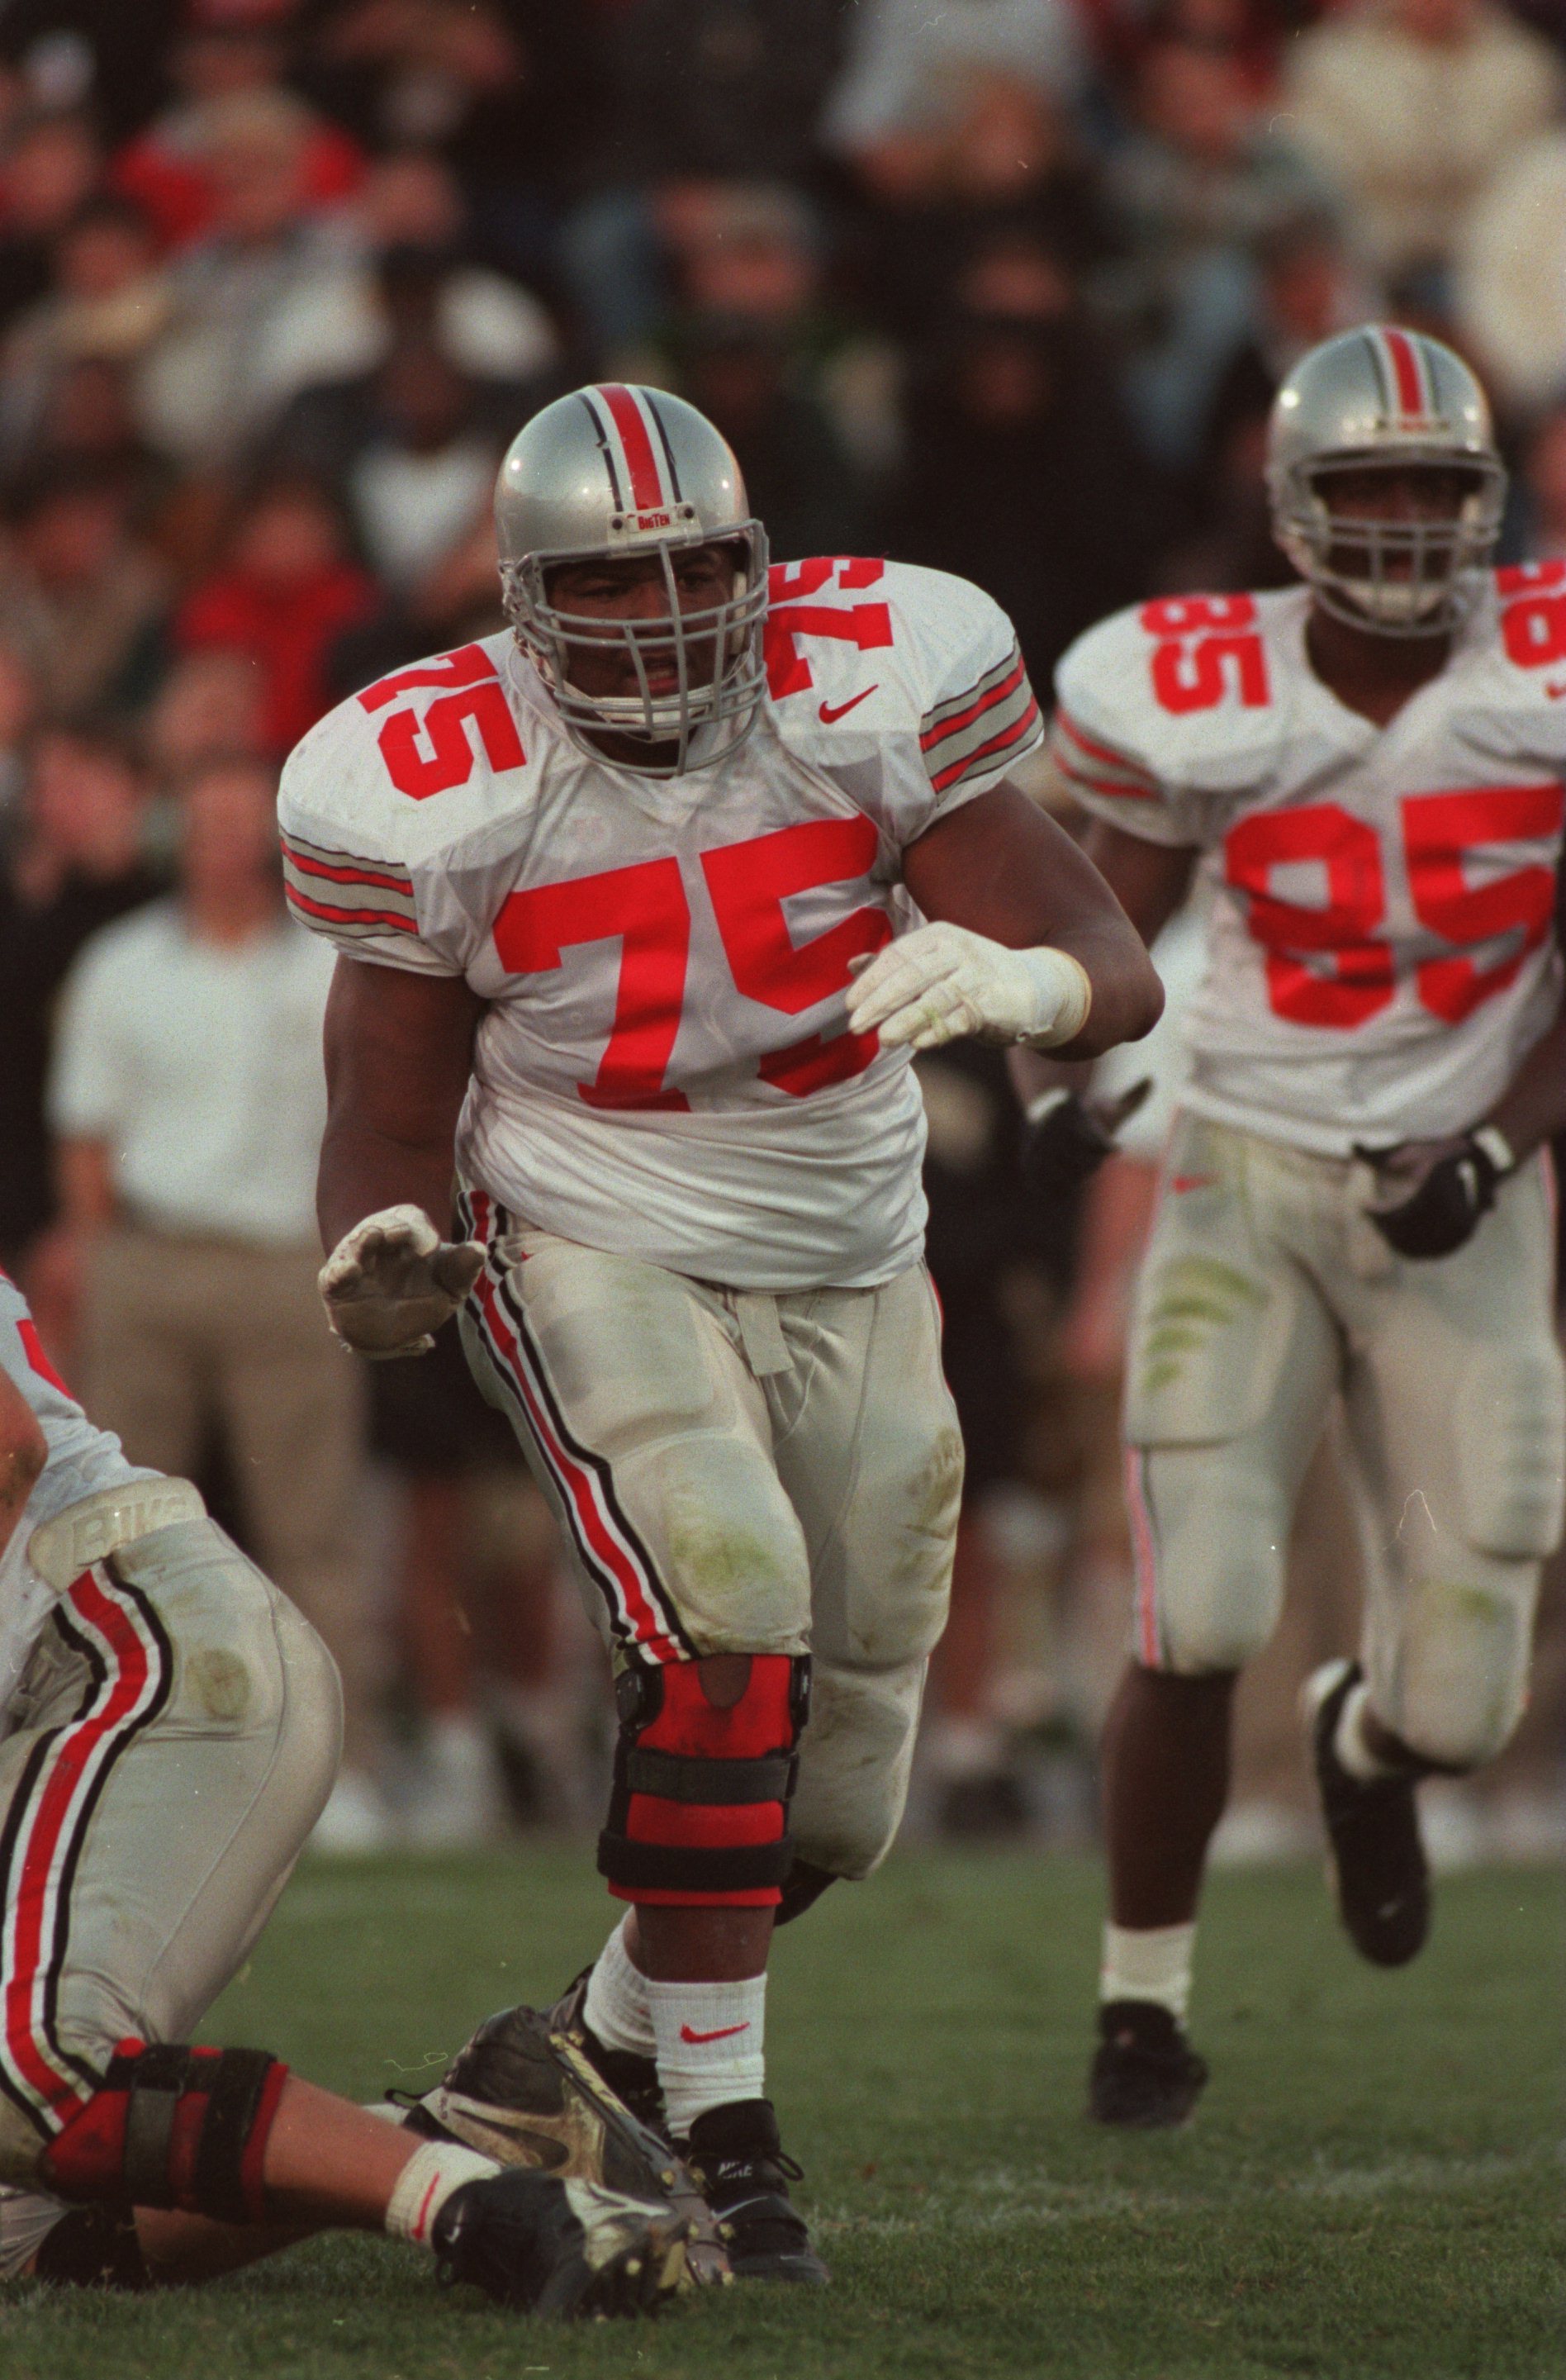 19 Oct 1996:  Offensive lineman Orlando Pace #75 of the Ohio State Buckeyes in action on the field as he leads through a hole in the offensive line to make a block during a play in the Buckeyes 42-14 victory over the Purdue Boilermakers at Ross Ade Stadiu